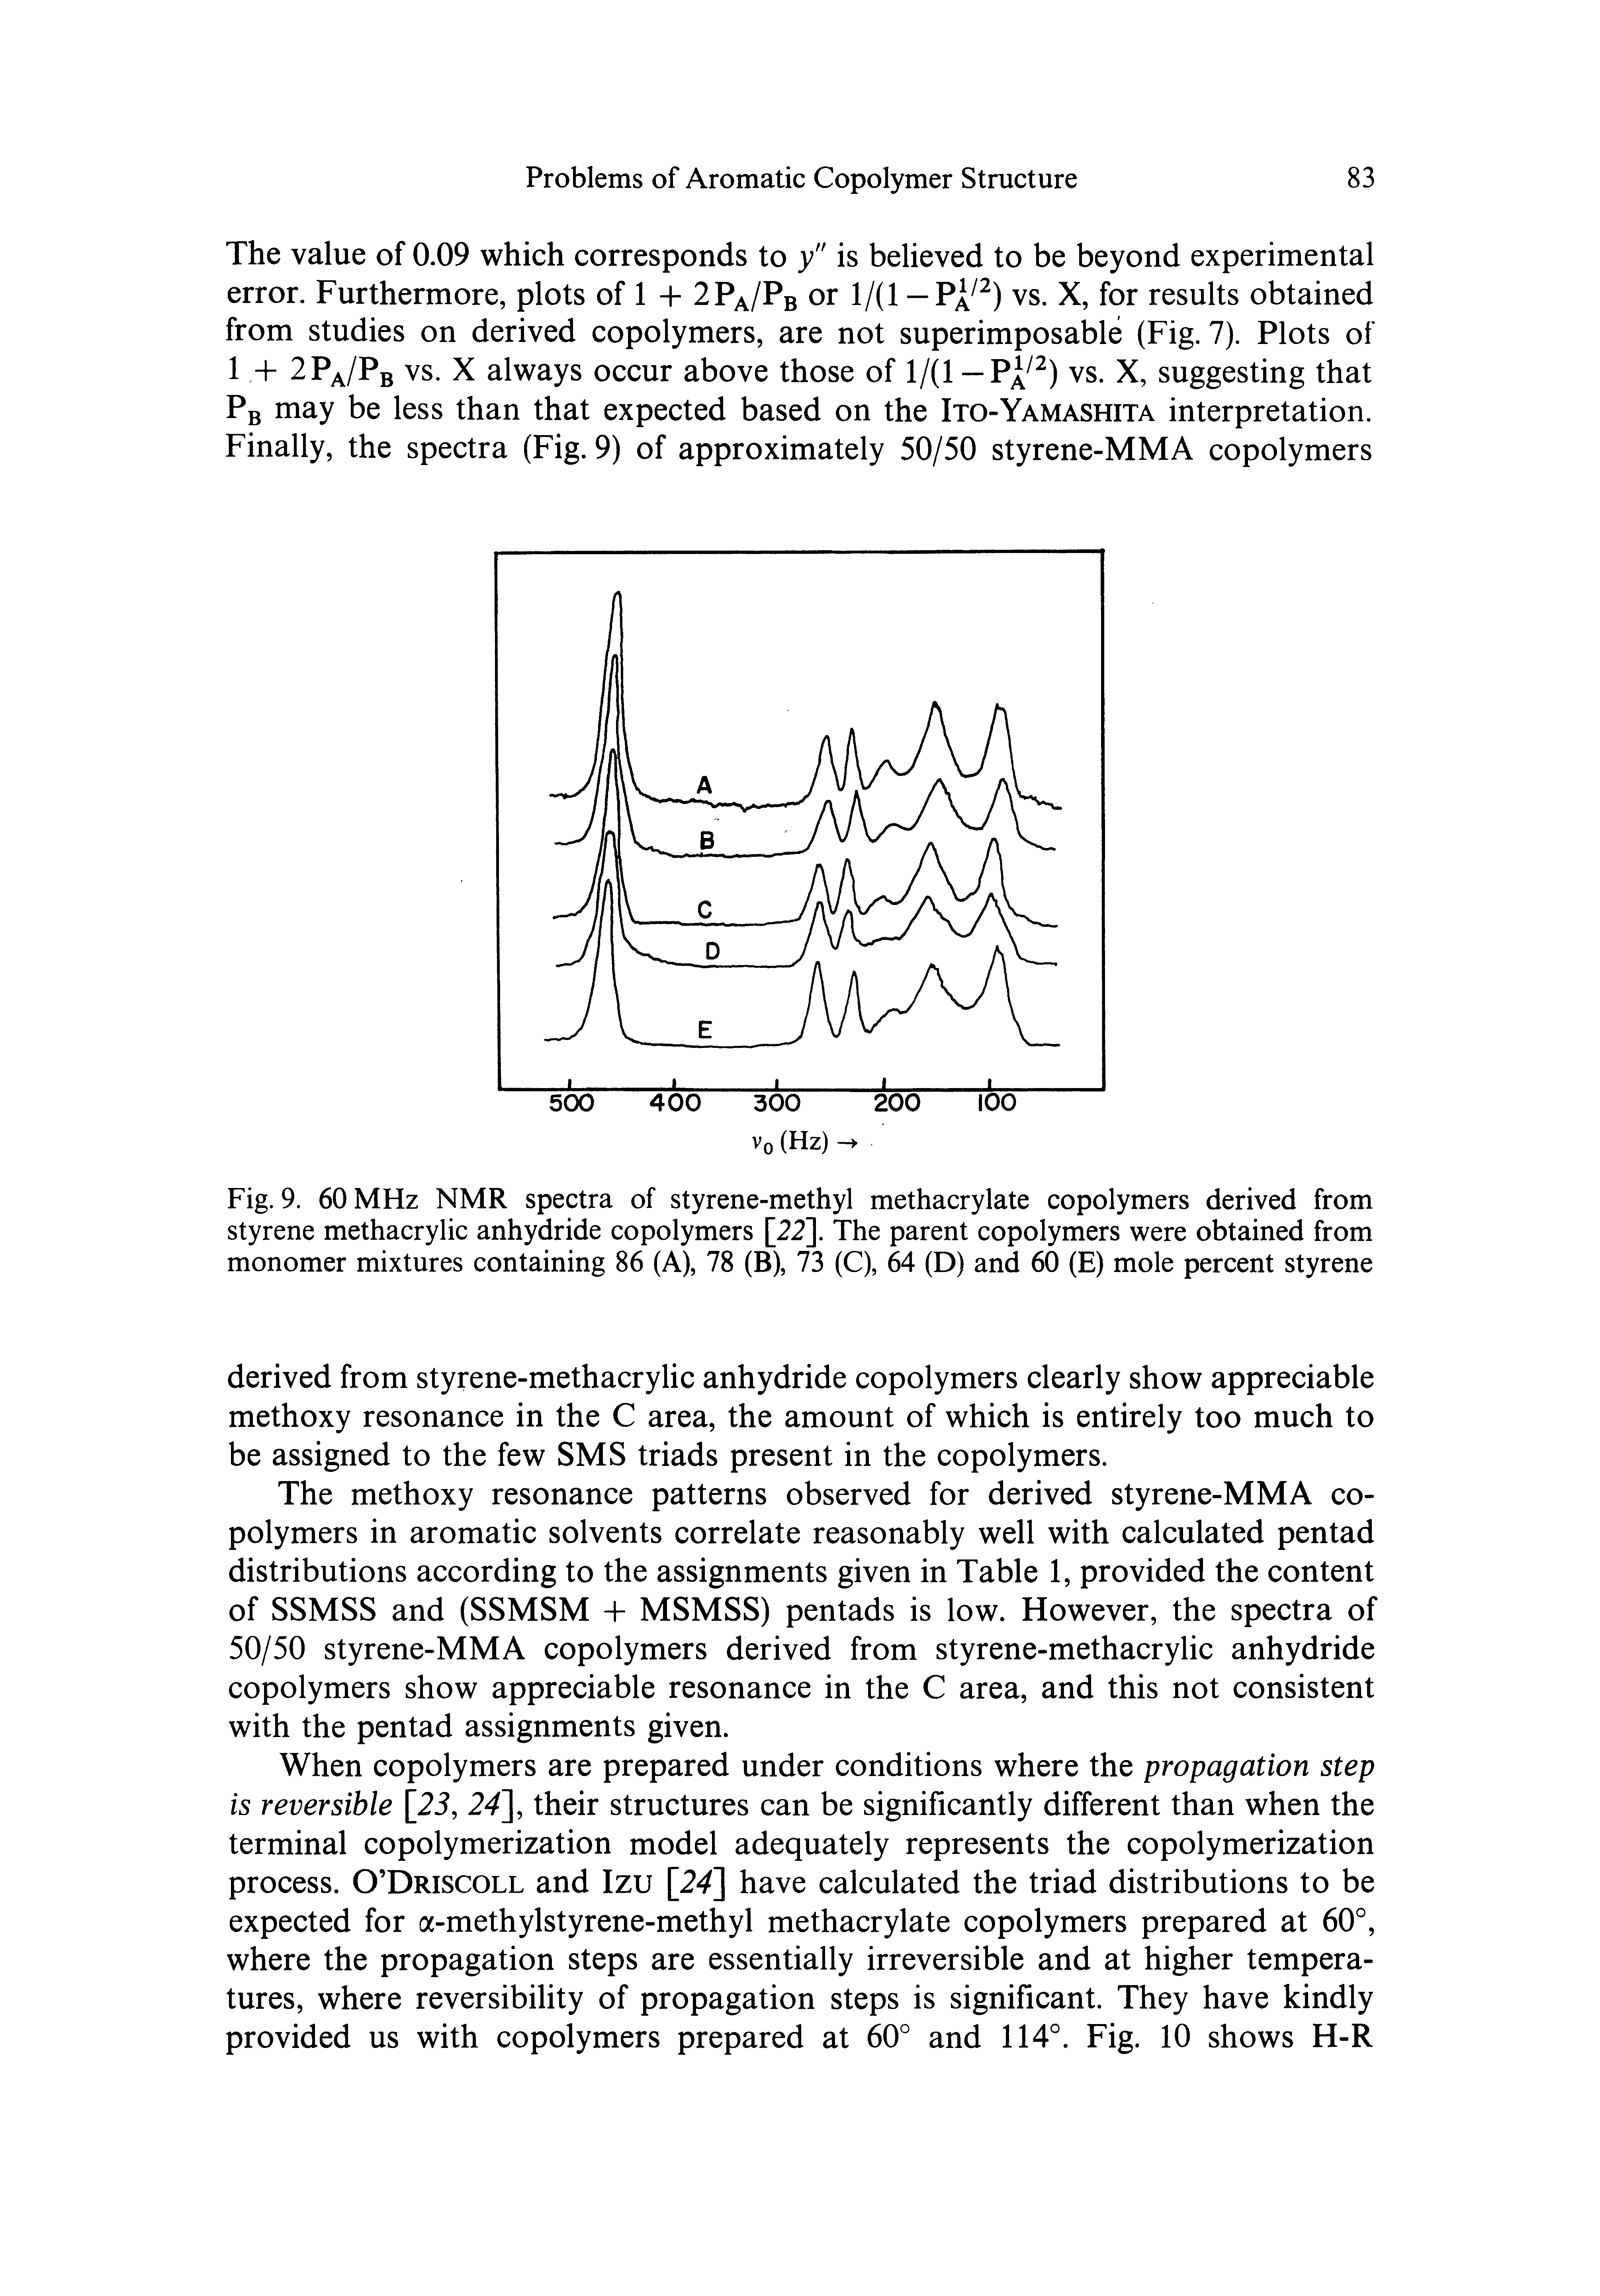 Fig. 9. 60 MHz NMR spectra of styrene-methyl methacrylate copolymers derived from styrene methacrylic anhydride copolymers [22]. The parent copolymers were obtained from monomer mixtures containing 86 (A), 78 (B), 73 (C), 64 (D) and 60 (E) mole percent styrene...